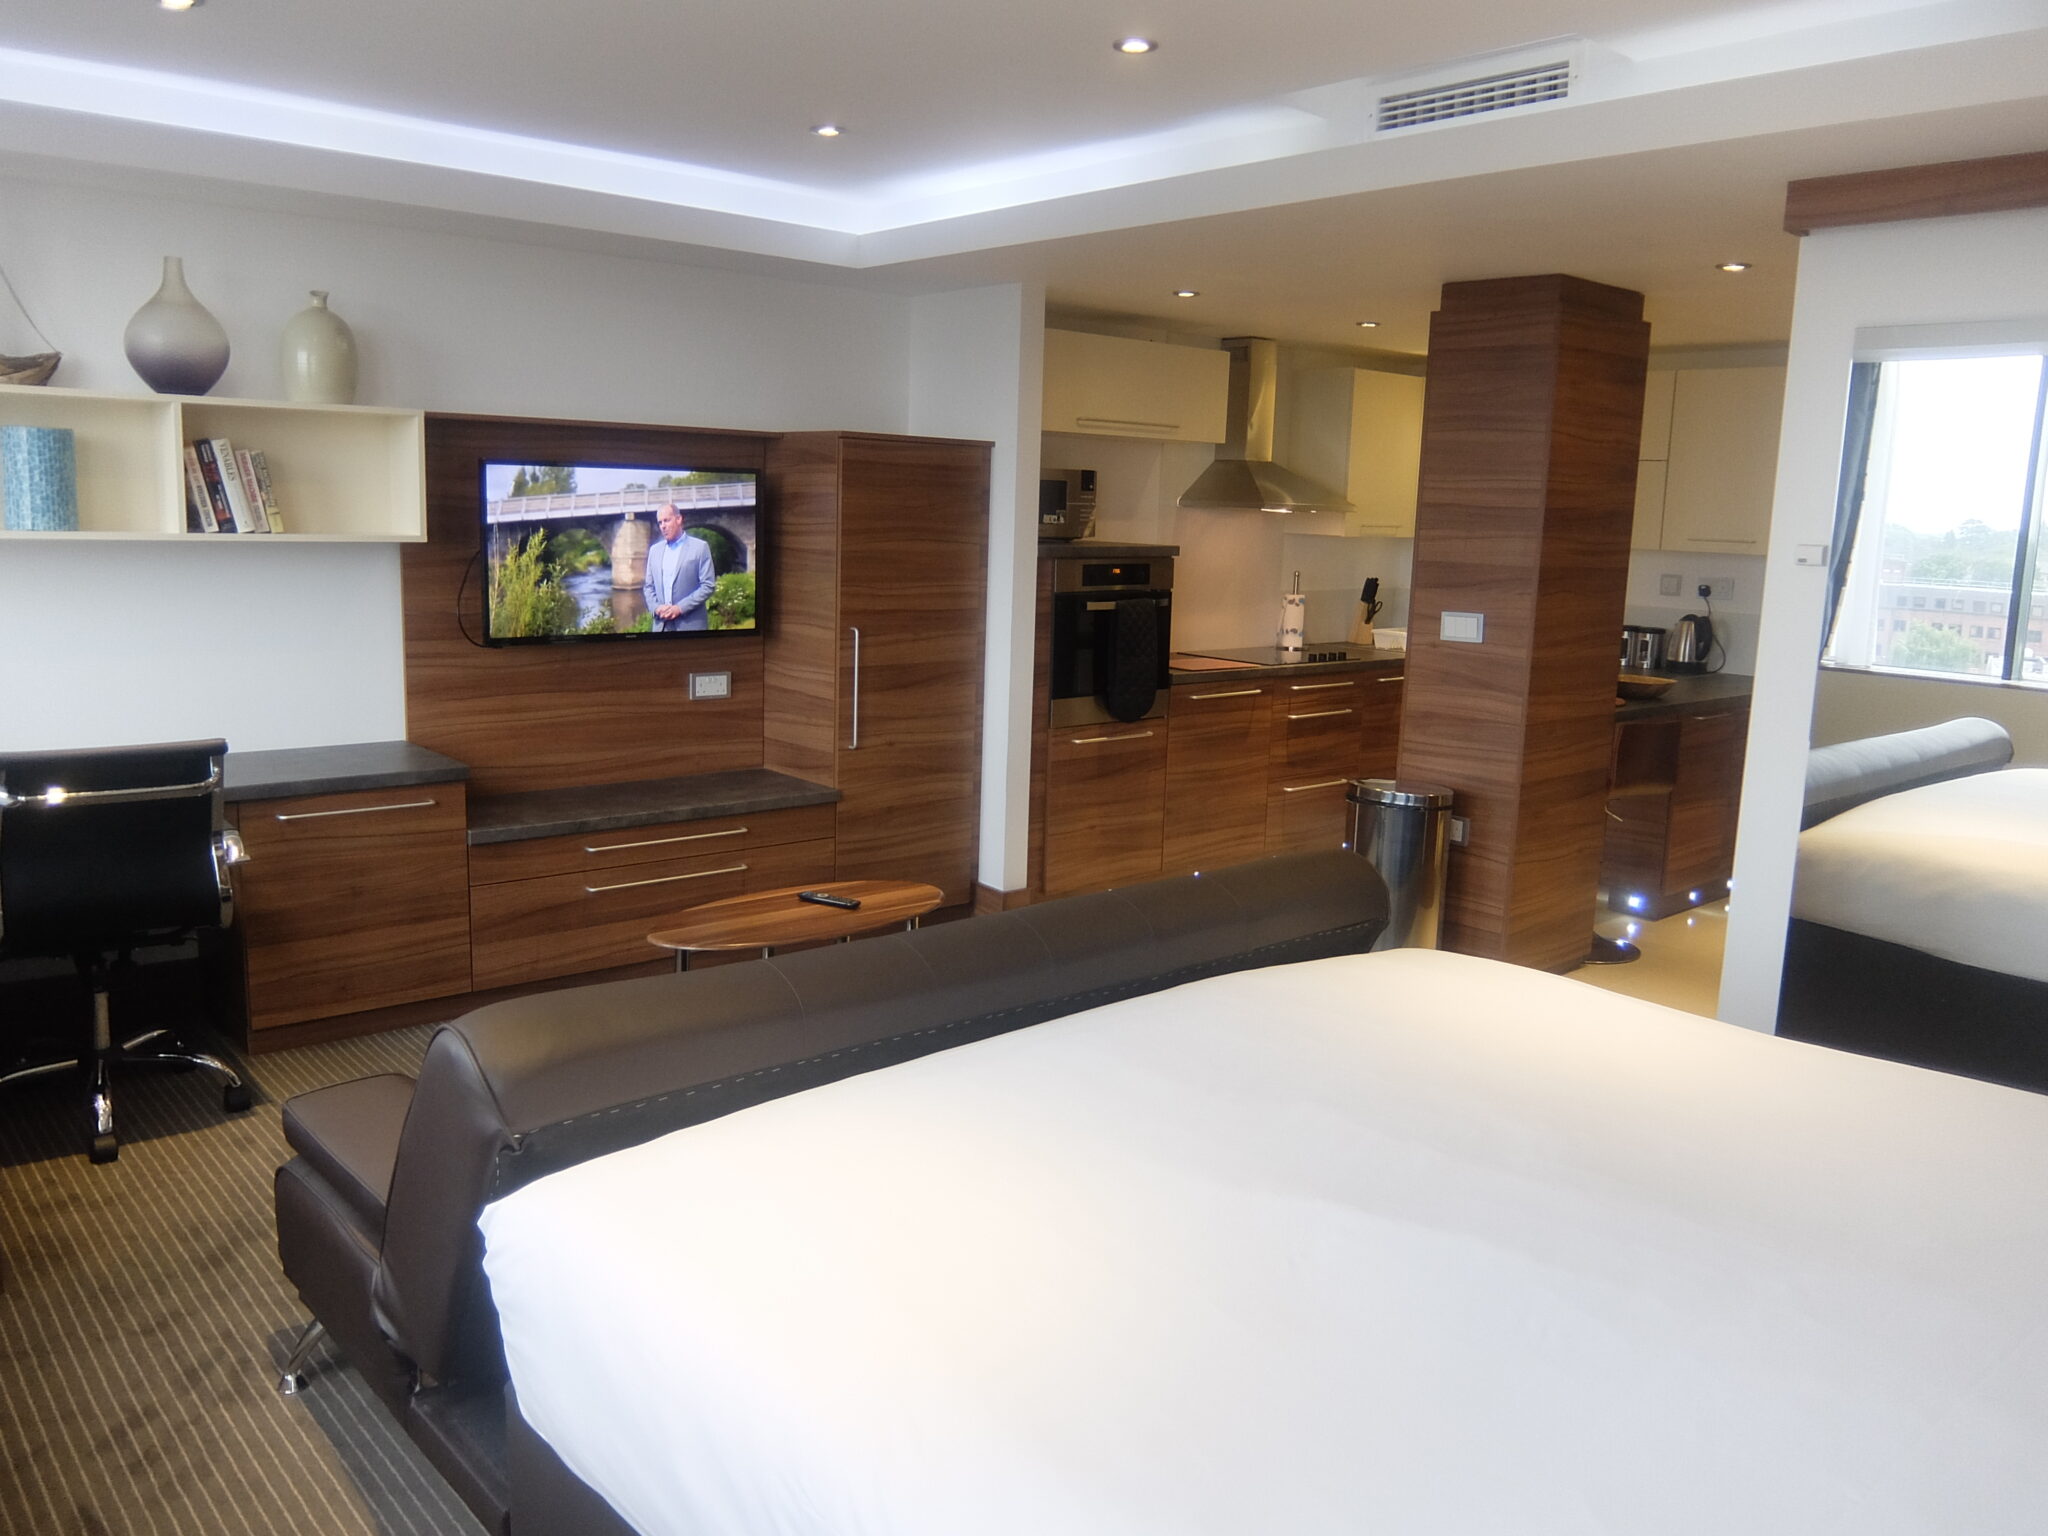 Serviced Apartments In Watford include free Wifi, TVs, and access to on-site facilities like a gym, bar, & restaurant.+44 (0) 208 691 3920